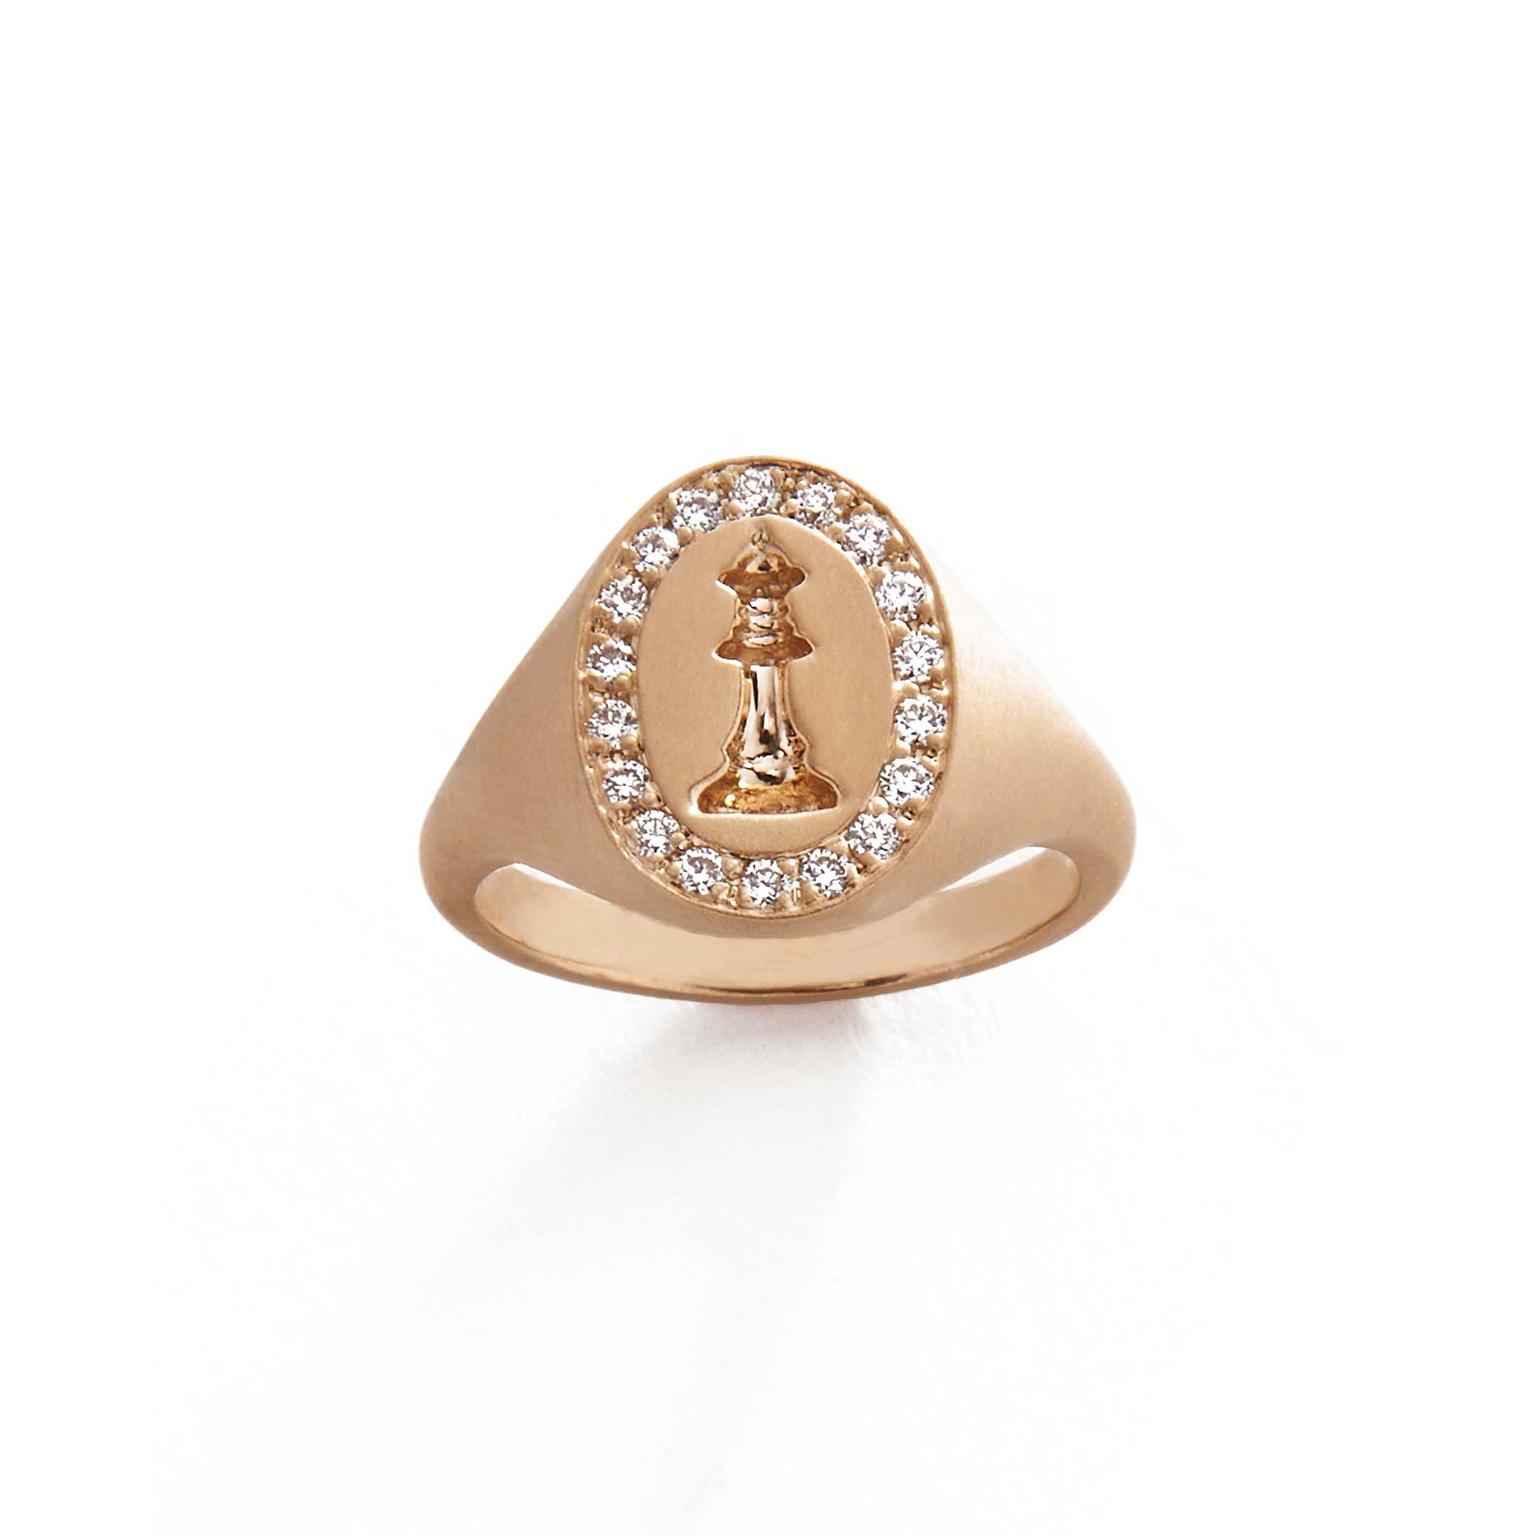 Michelle Fantaci Checkmate pinky ring with diamonds